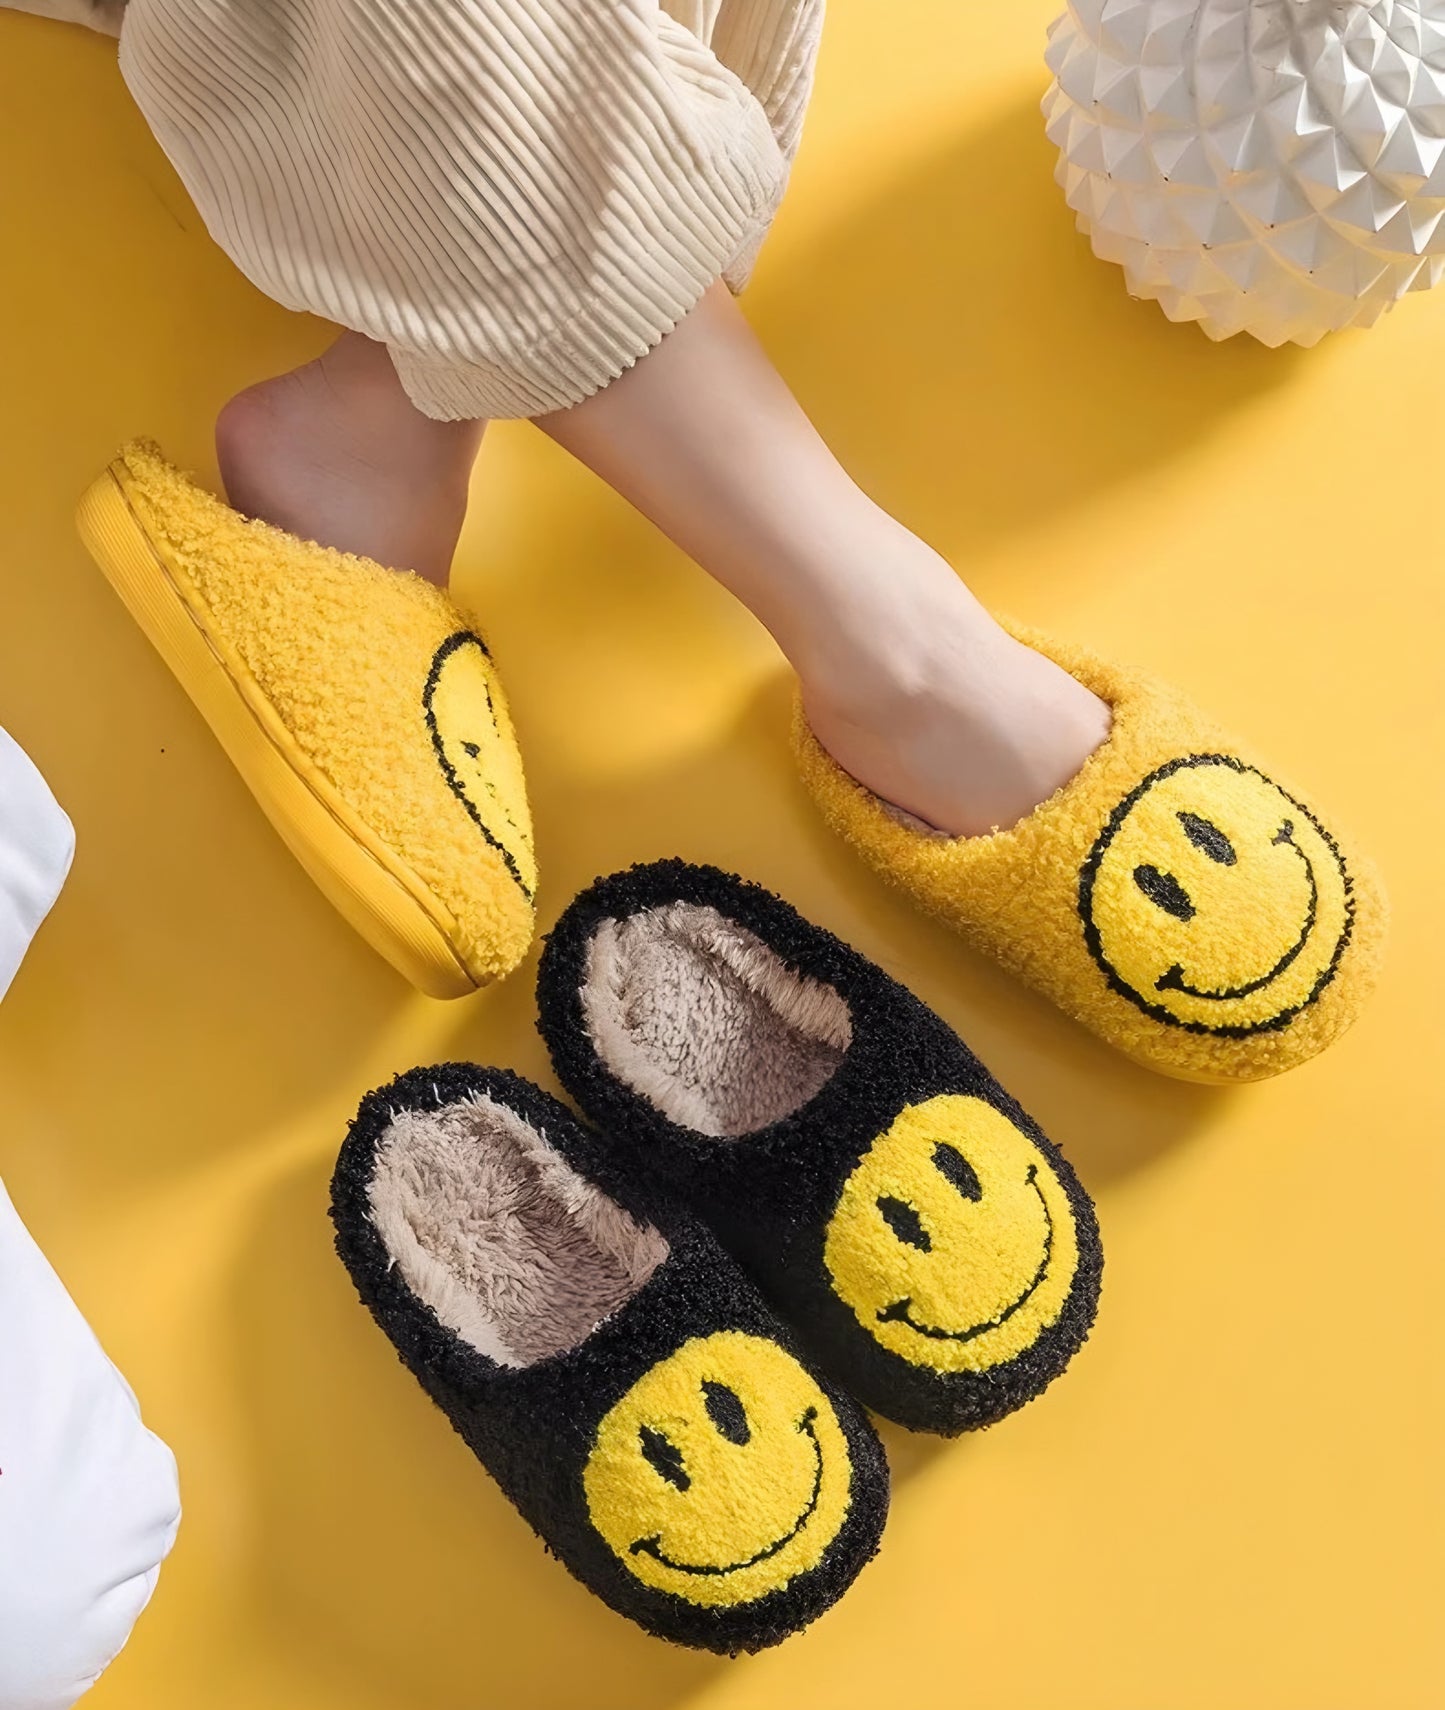 Smiley face Fluffy Slippers